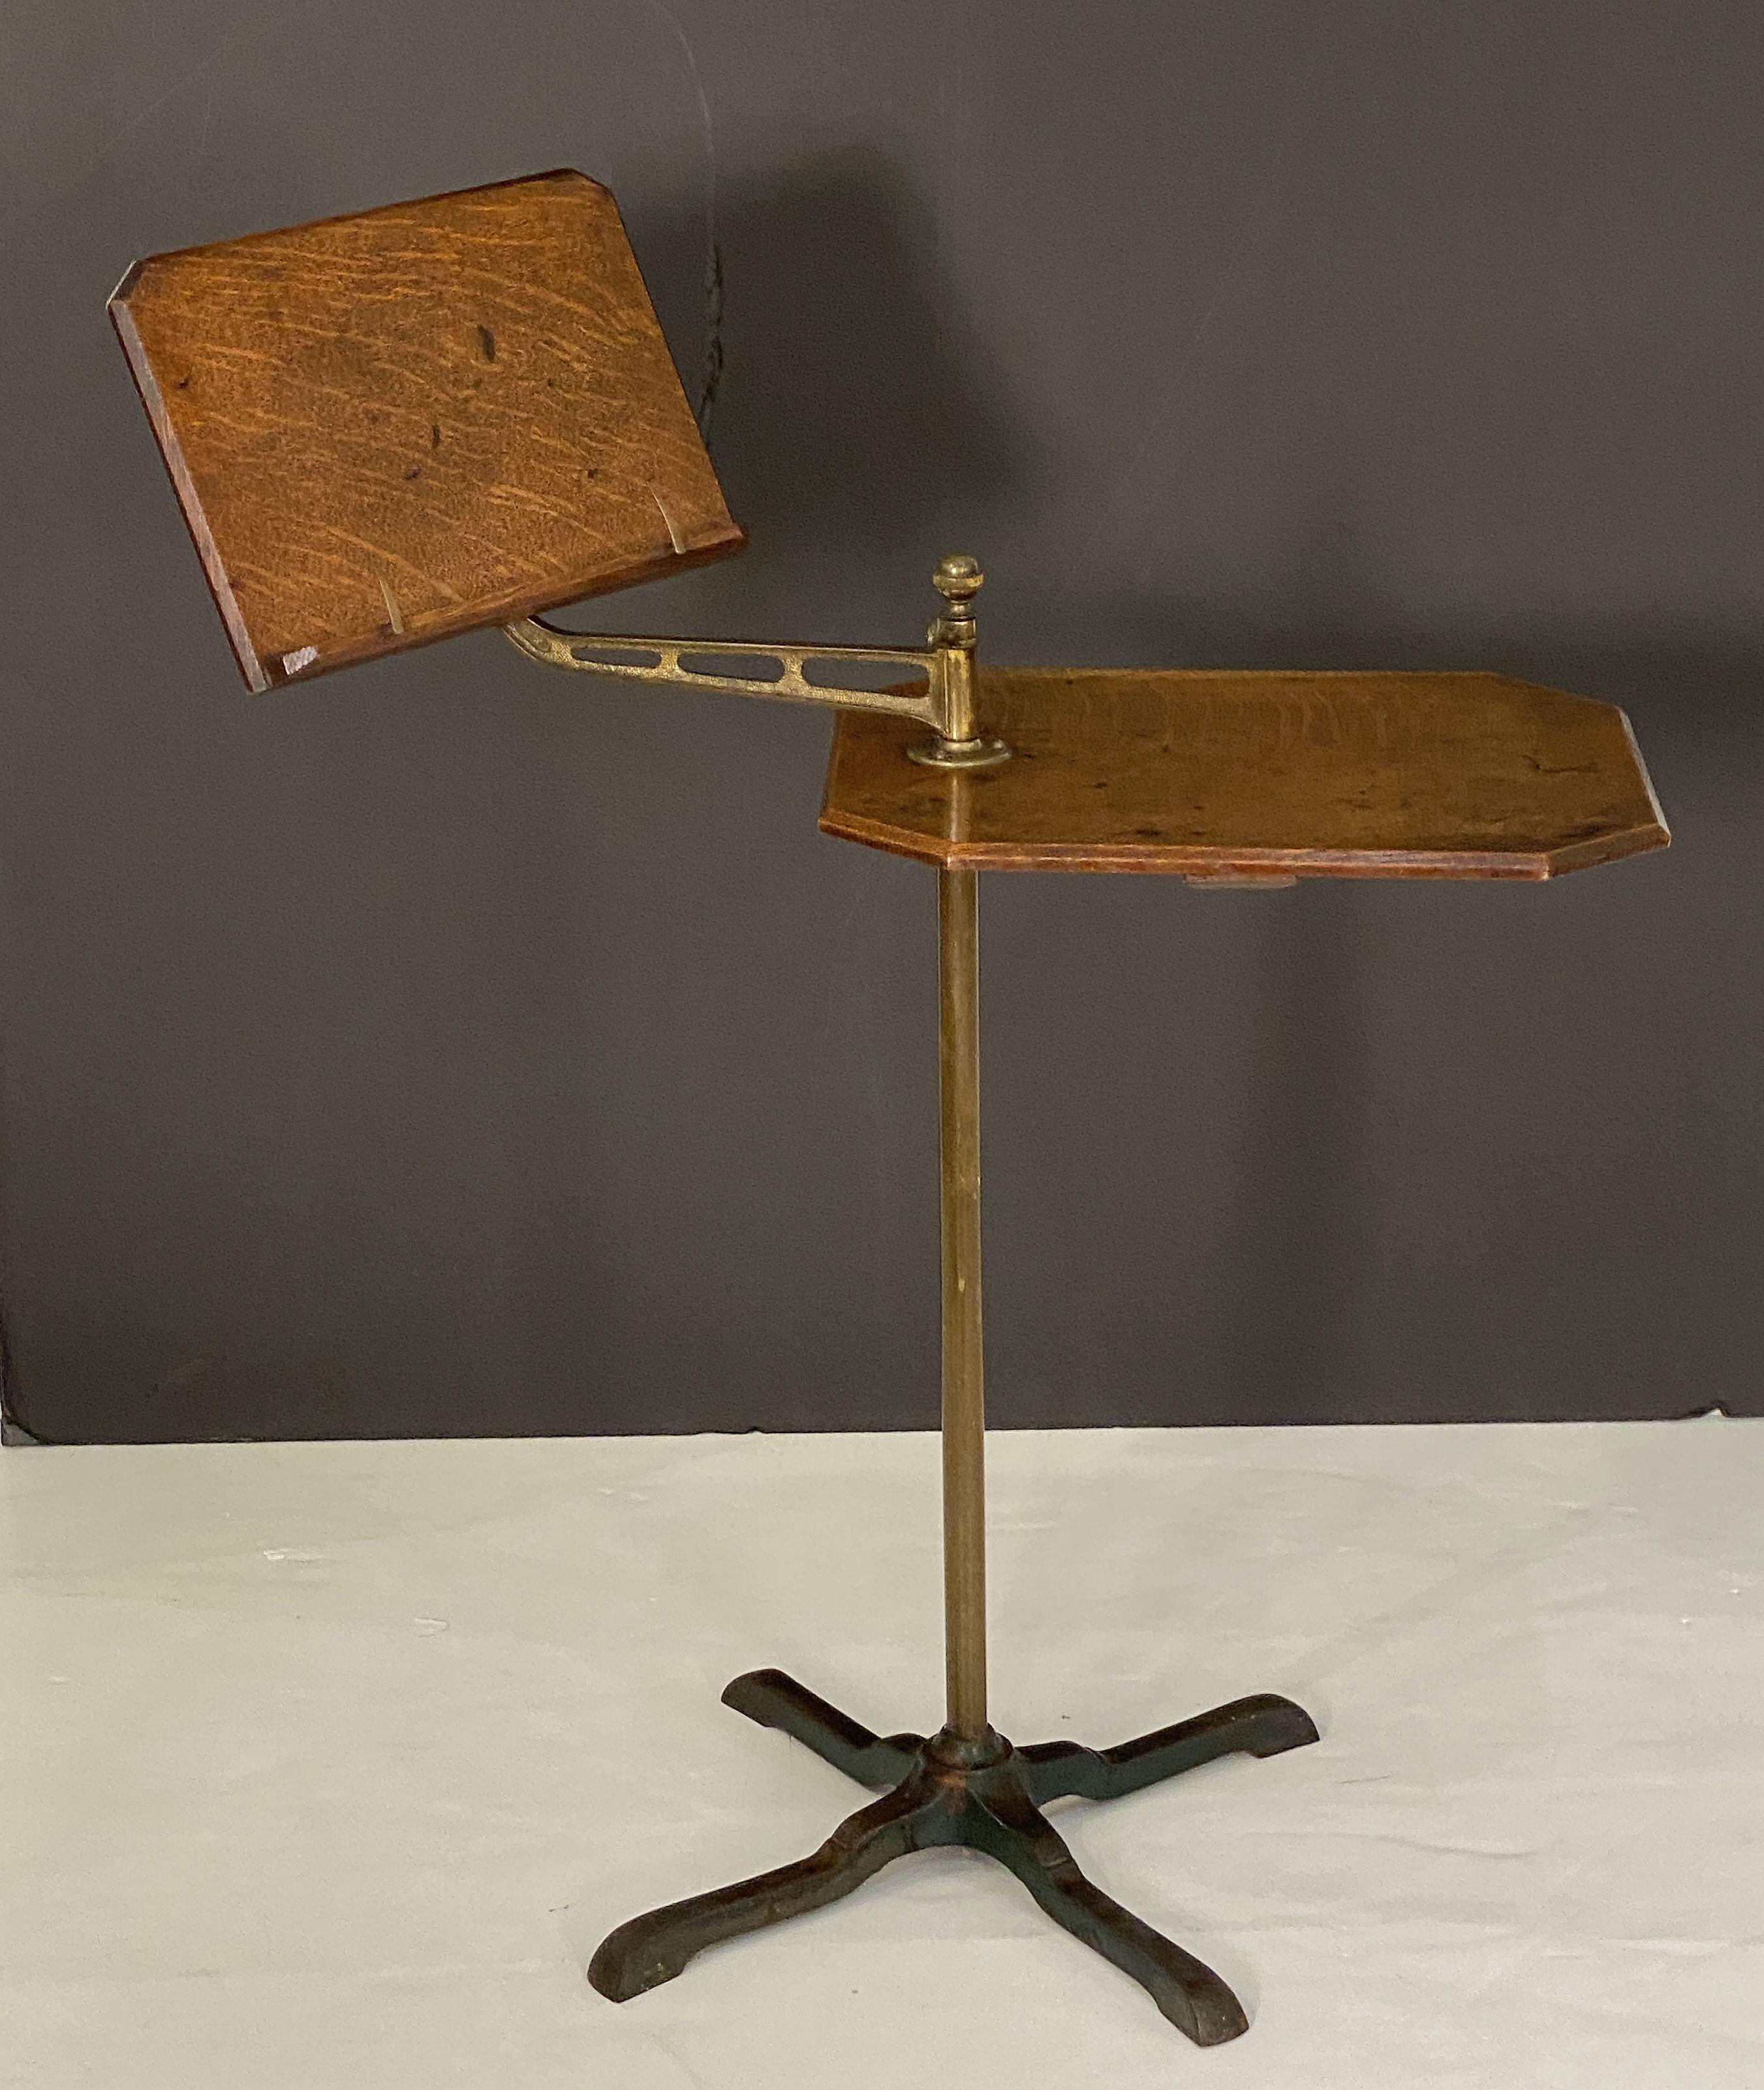 English Adjustable Floor-Standing Book Lectern or Reading Stand 7